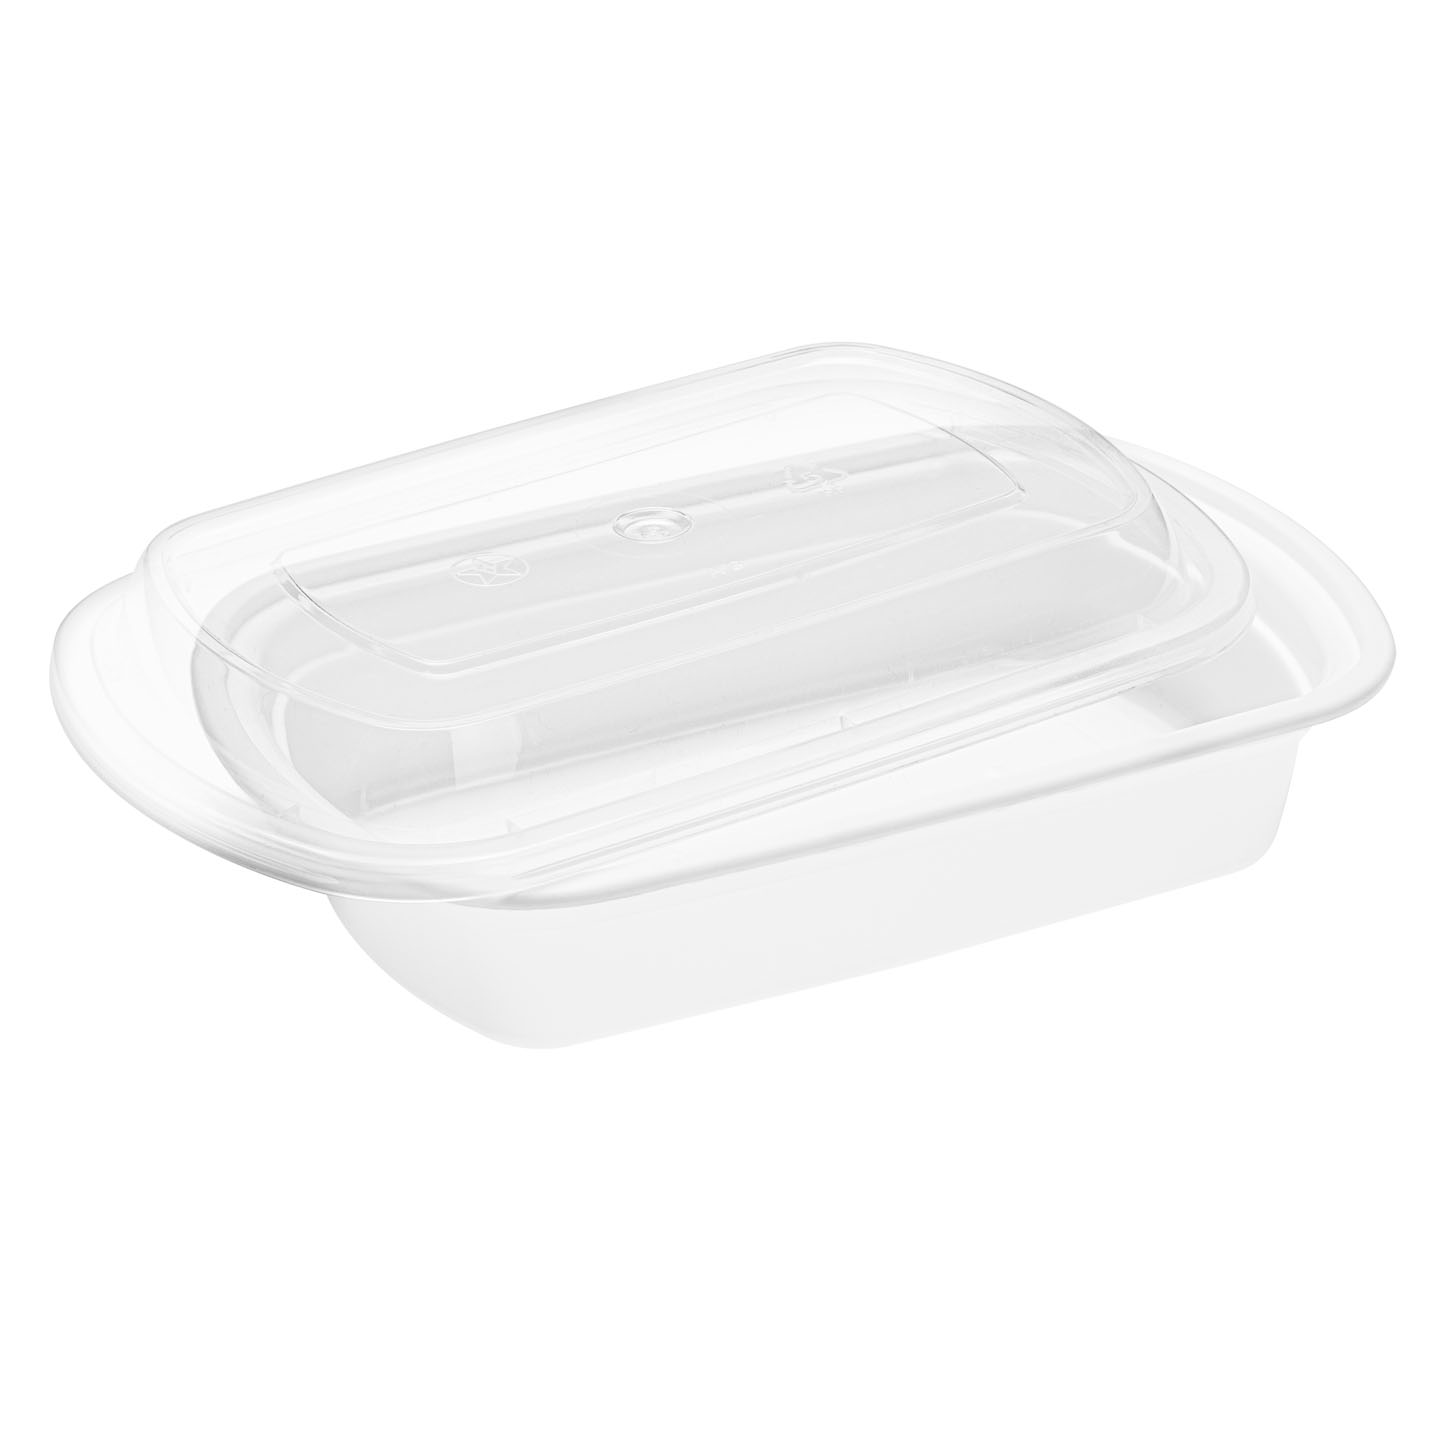 WY TRAYS - 7516 White - Combo